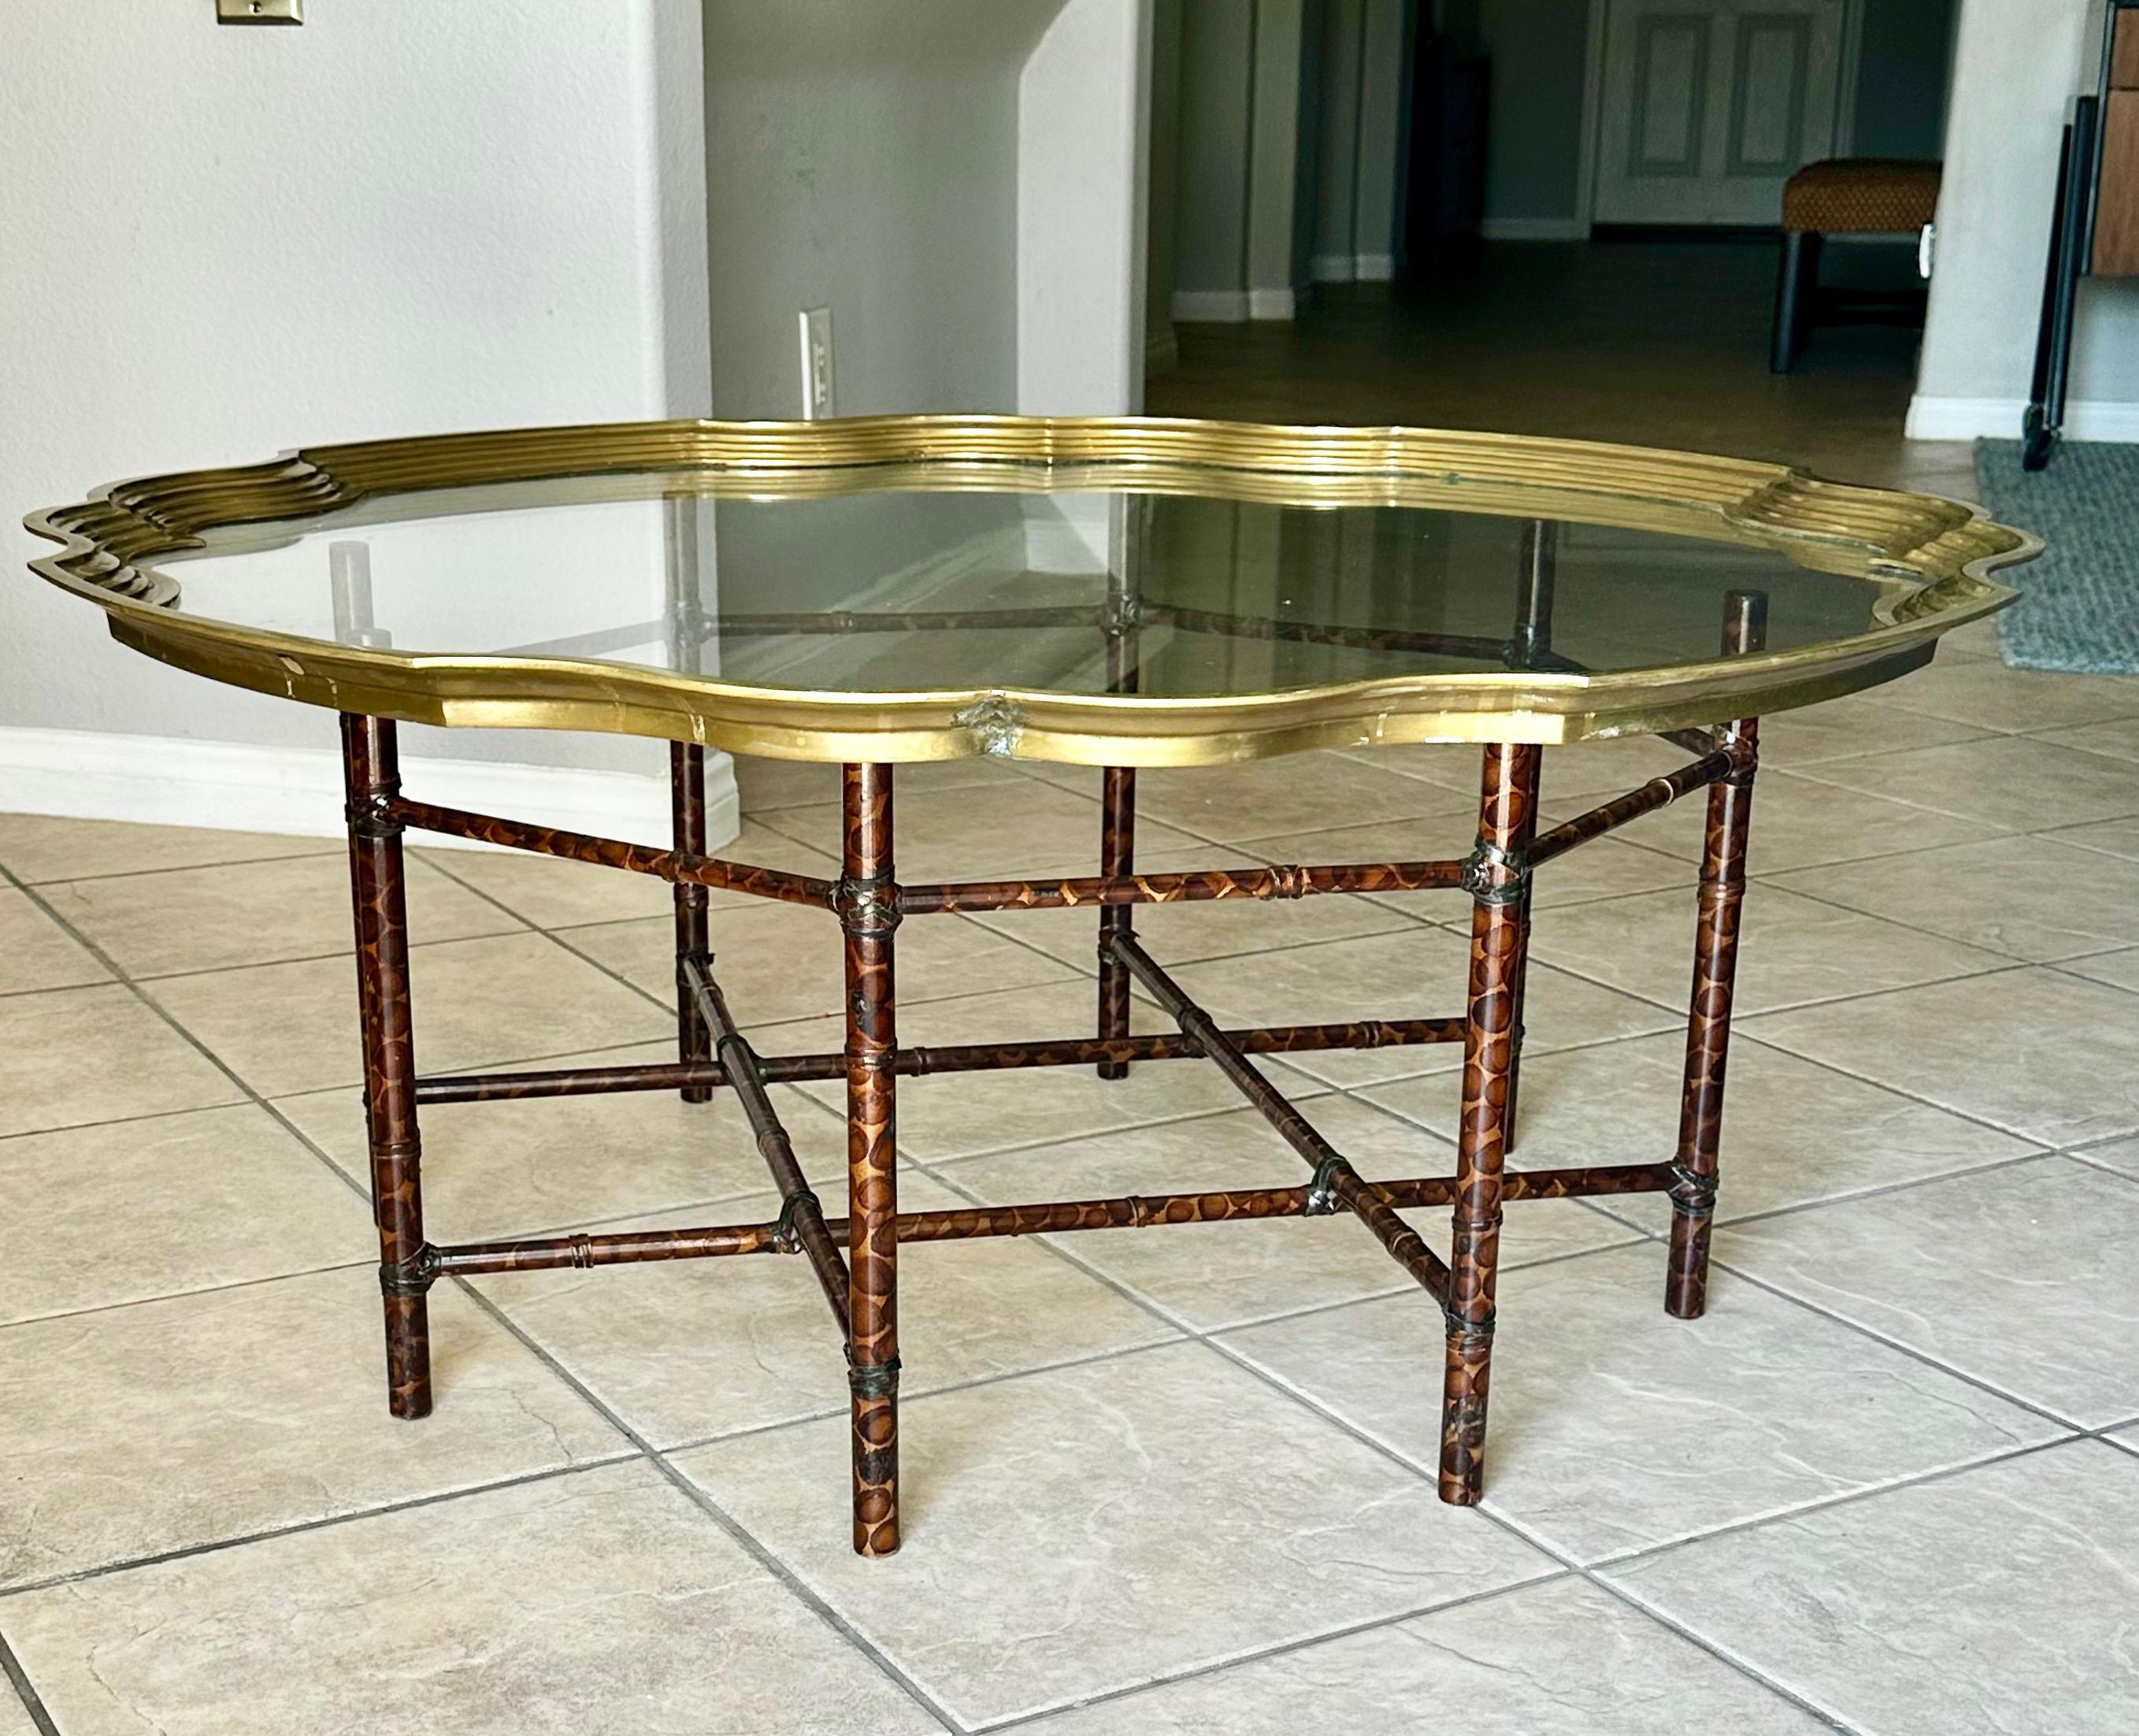 Round scallop edge brass and glass inset top coffee table. Supporting the top is a faux bamboo 